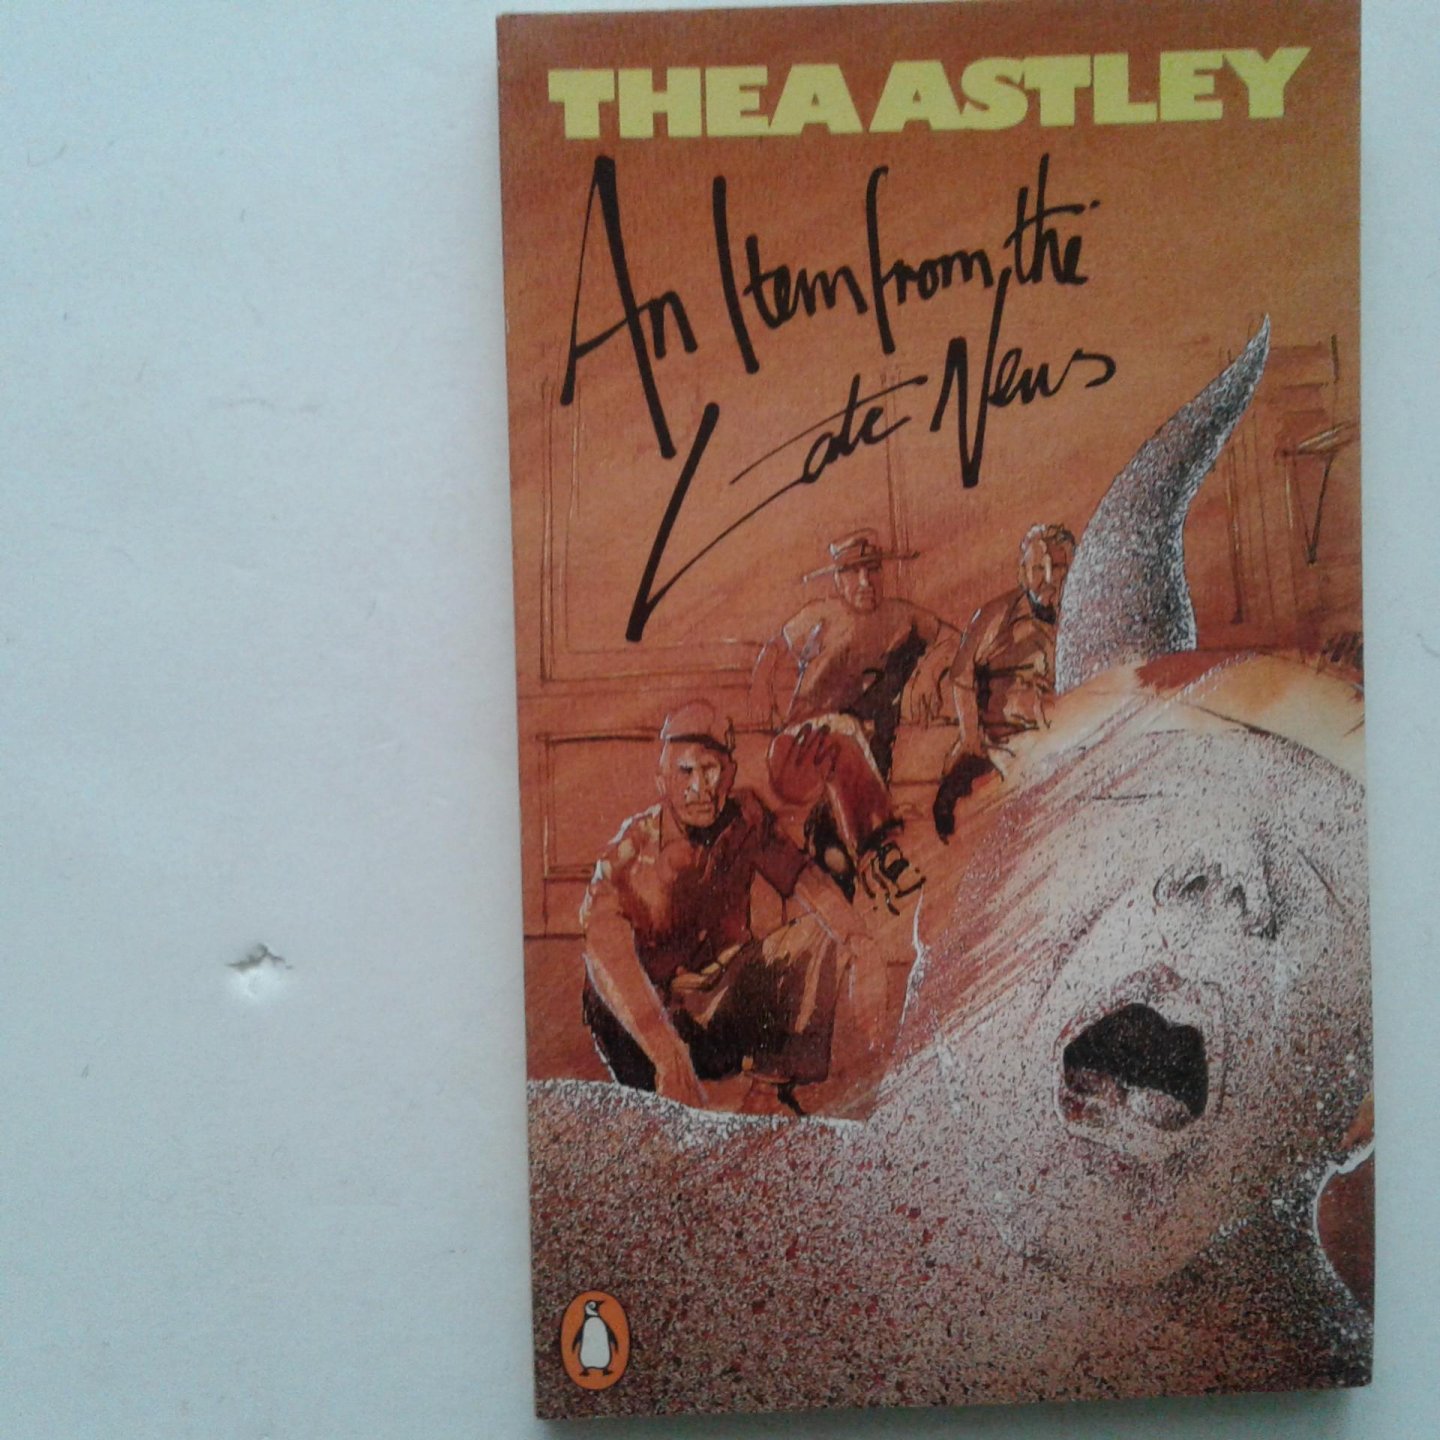 Astley, Thea - An Item from the Late News